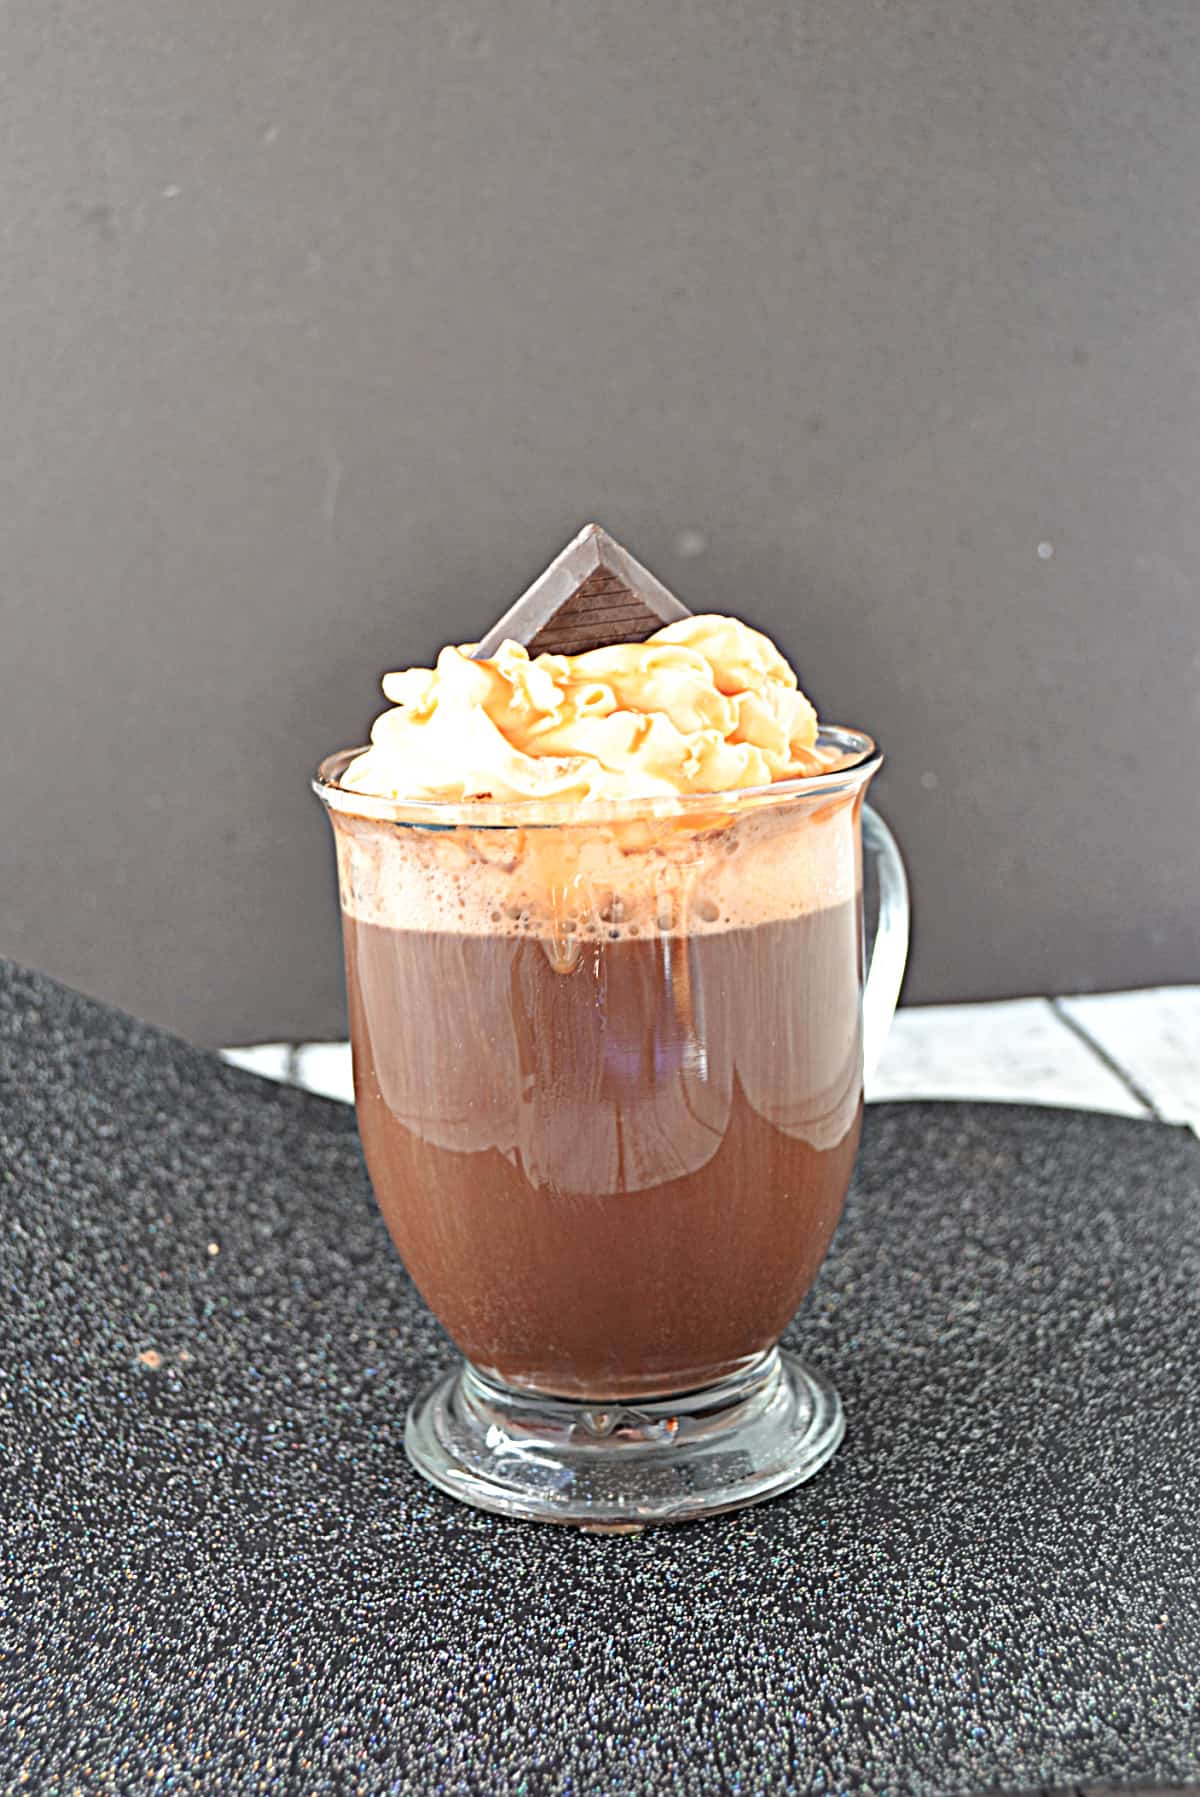 A mug of hot cocoa with whipped cream and a piece of chocolate on top.